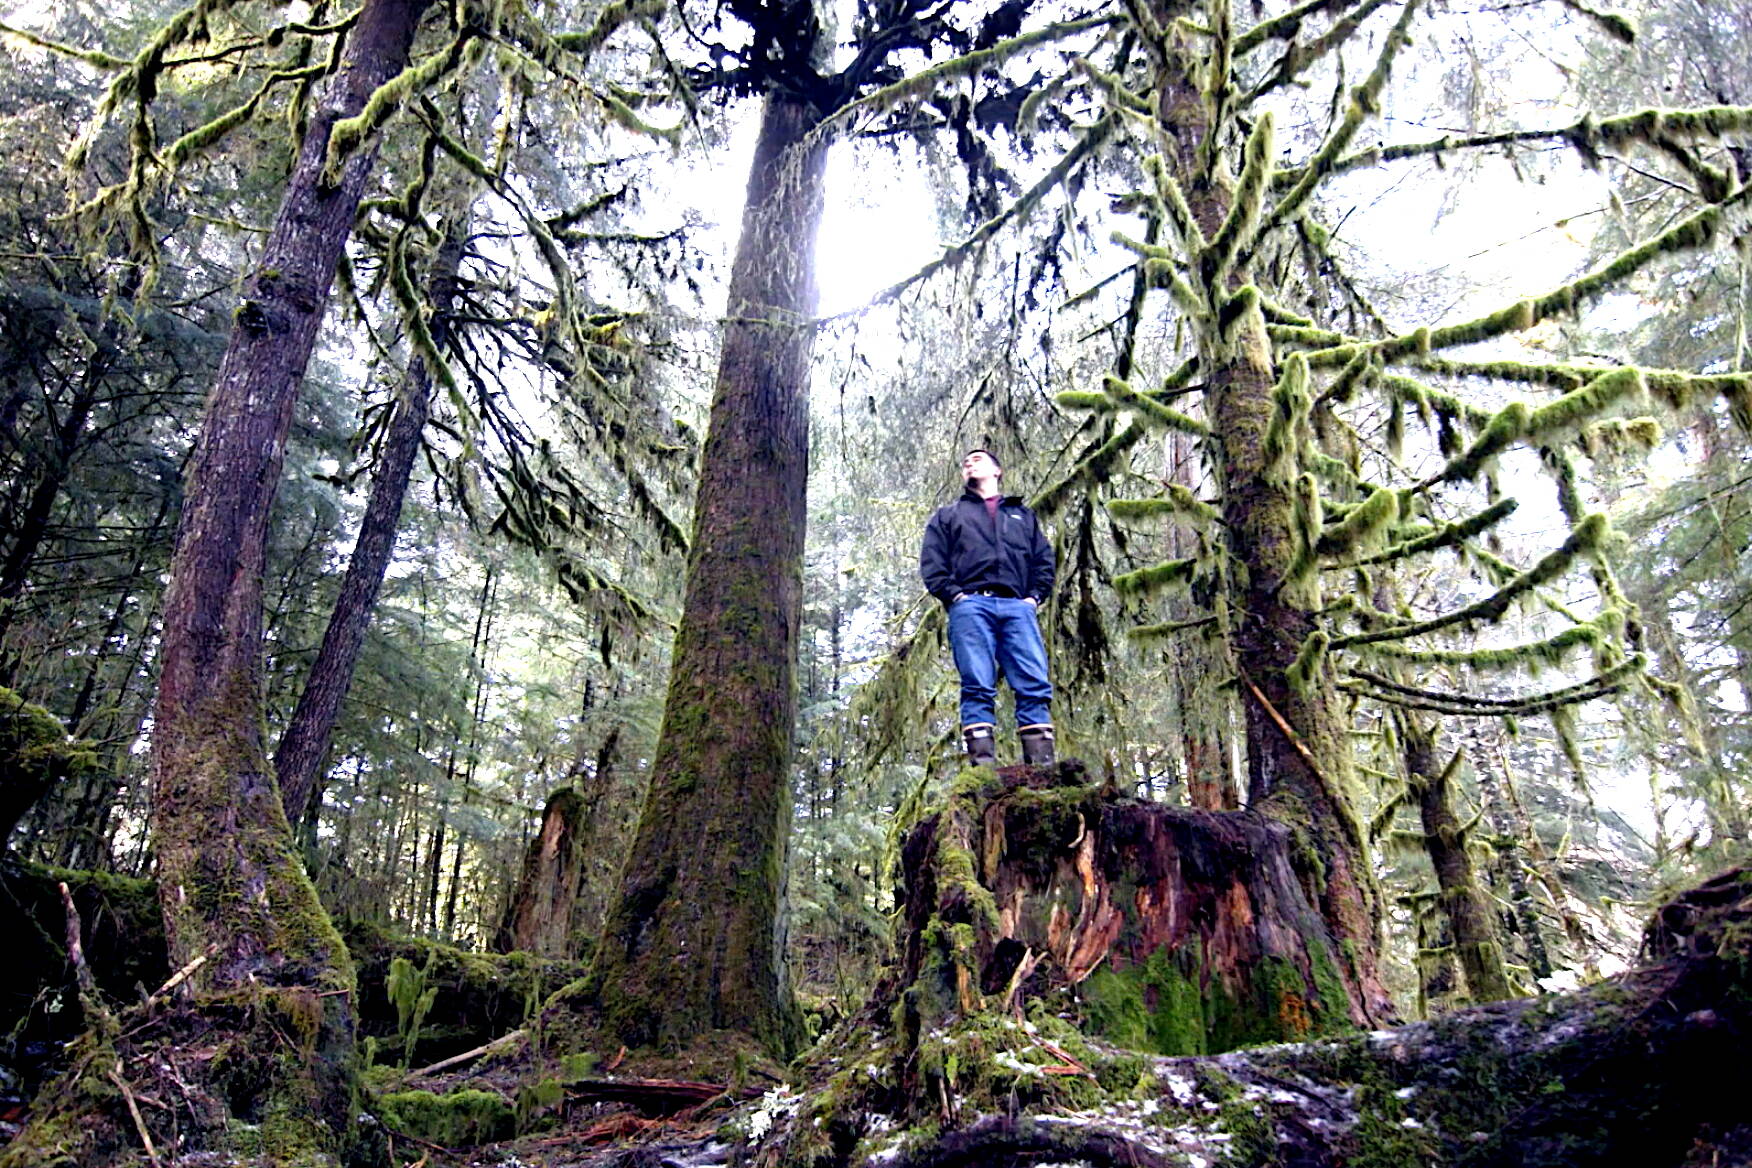 Mitchell Haldane, Sealaska’s carbon offset administrator, surveys forest land owned by the Juneau-based Alaska Native corporation that has earned more than $100 million since 2016 by putting the property into California’s carbon credits markets, which is paying to keep the land unharvested for 100 years. (Screenshot from YouTube video by Sealaska Corp.)